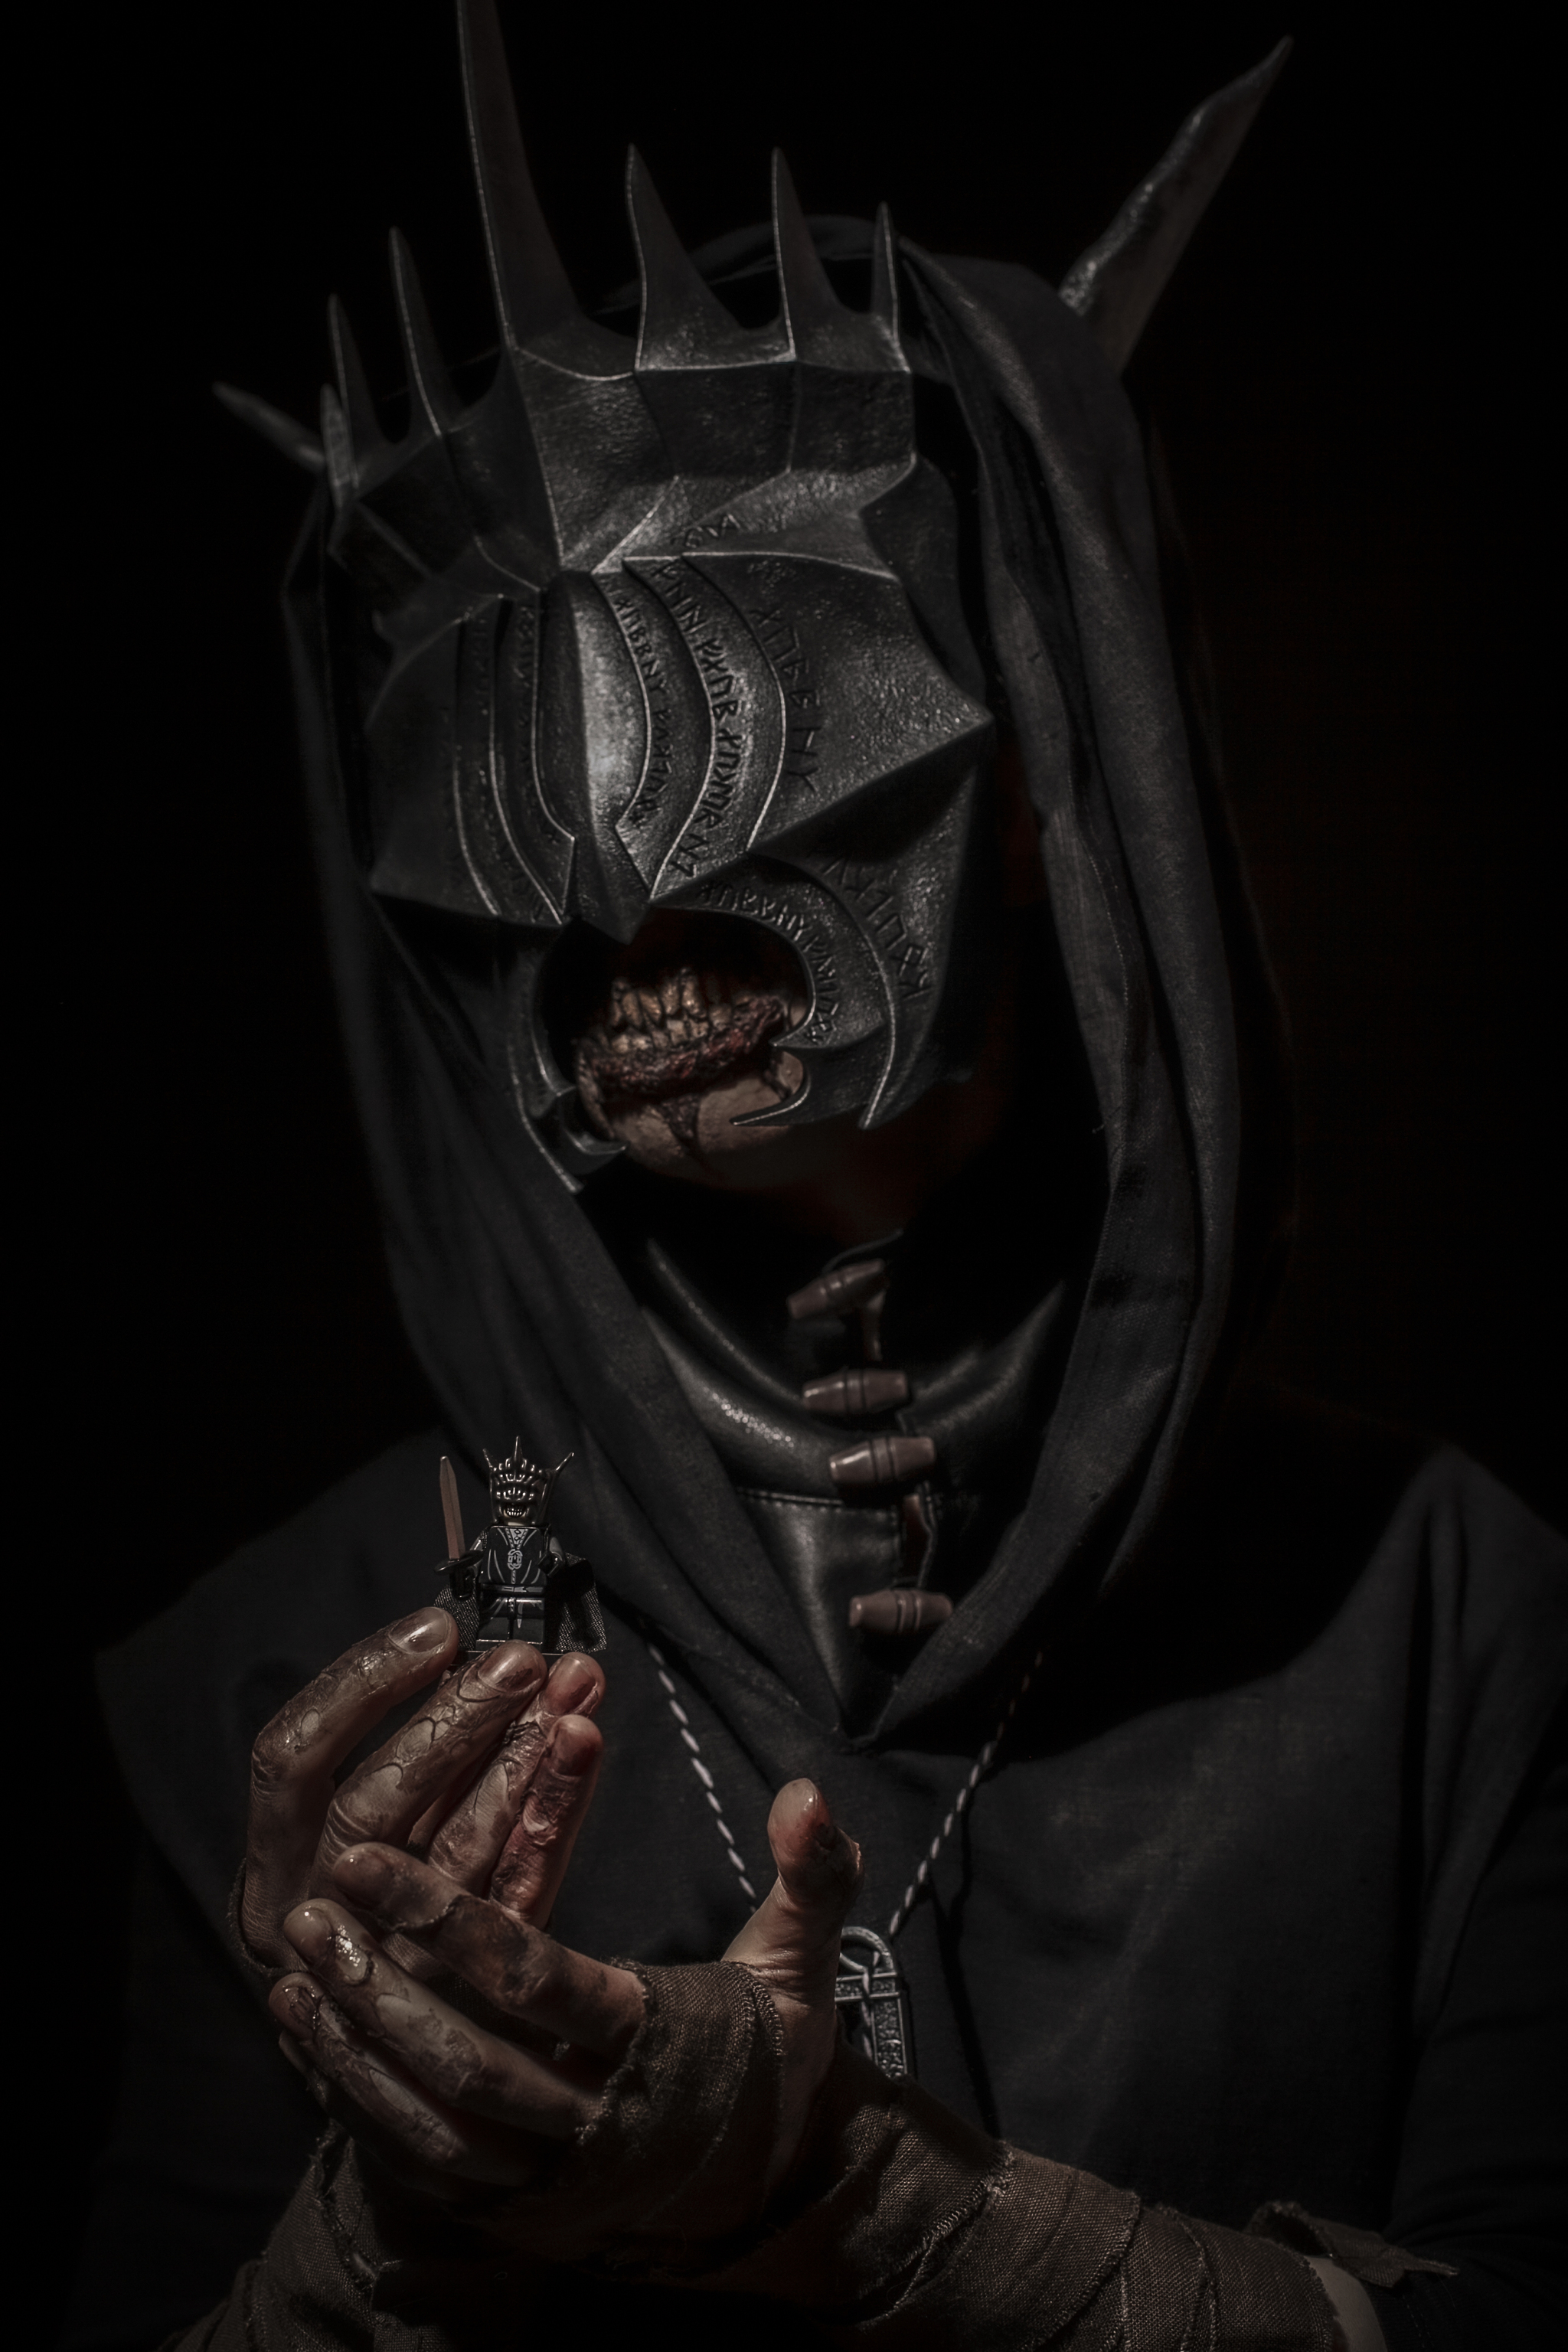 My cosplay of the Herald of Sauron (Lord of the Rings) - My, Cosplayers, Cosplay, PHOTOSESSION, The photo, Fantasy, Lord of the Rings, Costume, Fashion model, Crier, Makeup, Lego, Horror, Craft, Mask, Tolkien, Middle earth, Voice of Mordor, Mordor, Sauron, Ring of omnipotence, Longpost